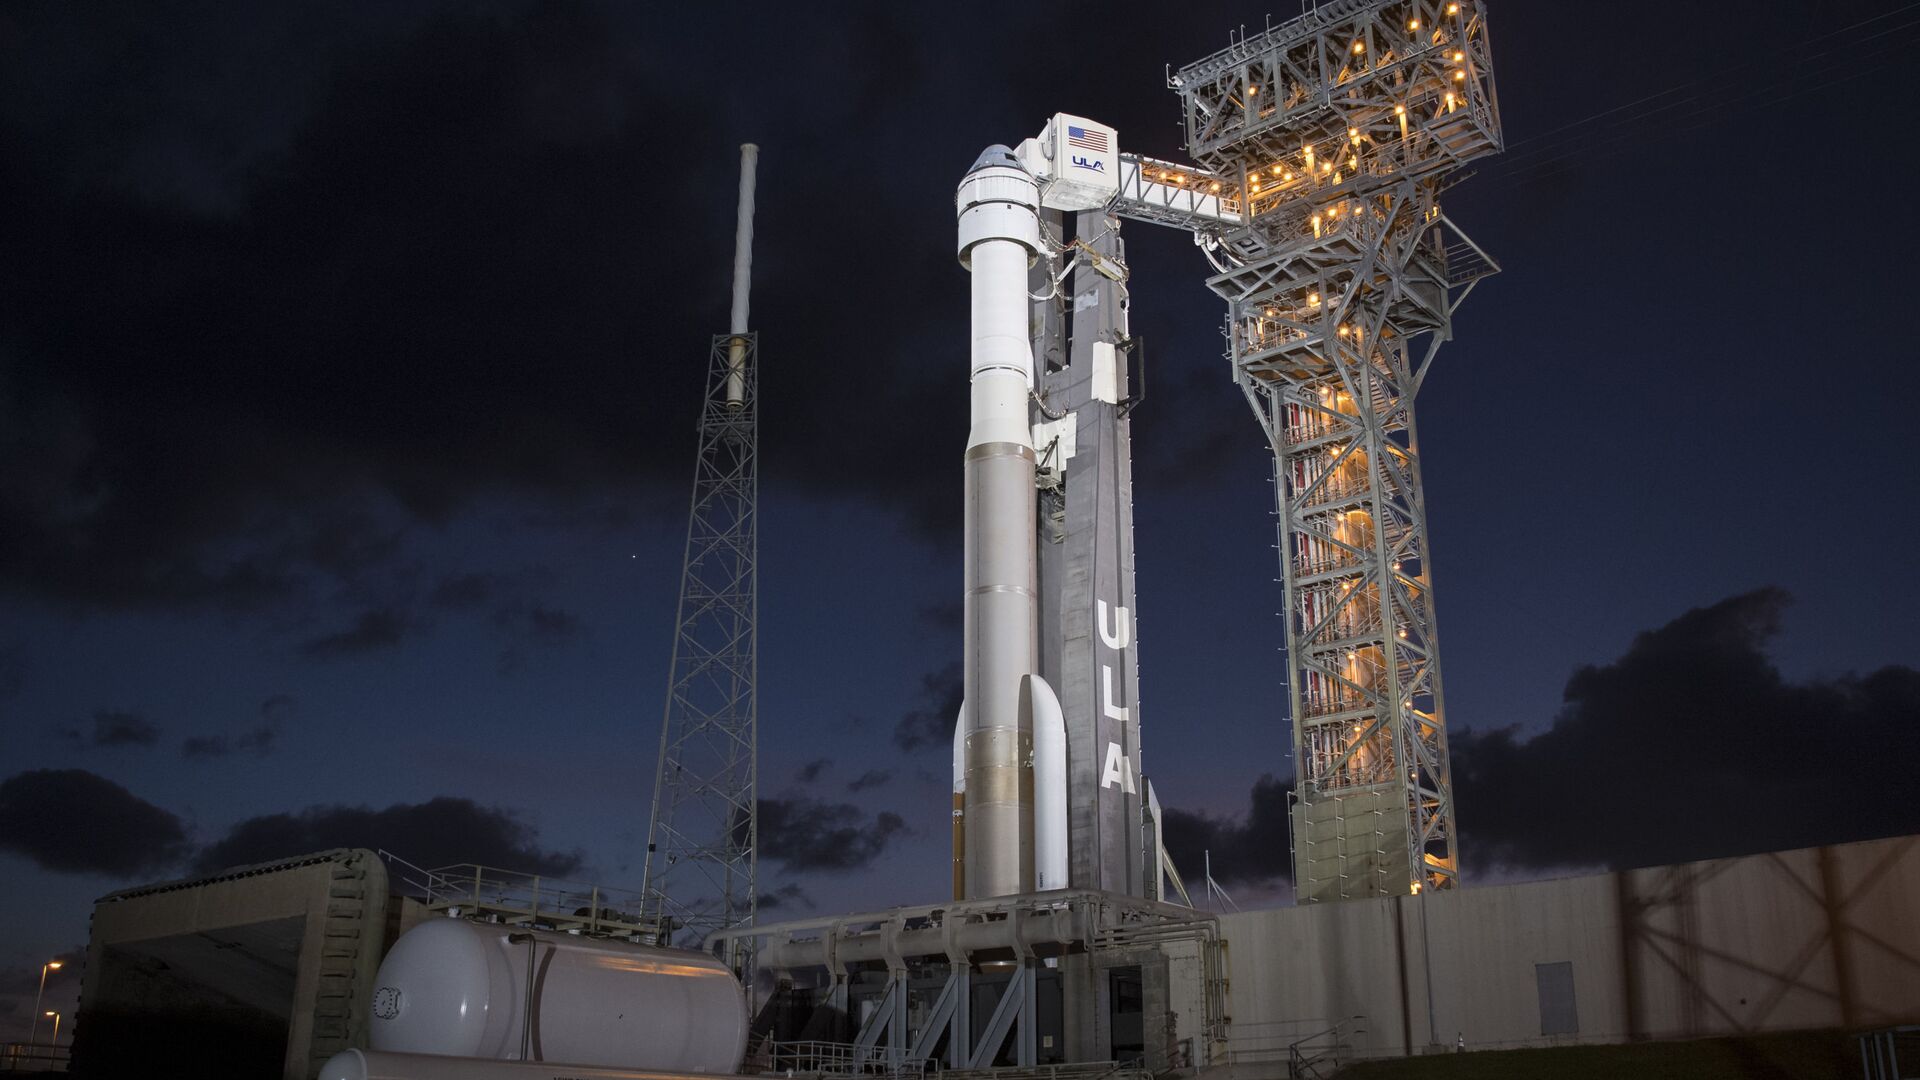 A United Launch Alliance Atlas V rocket with Boeing's CST-100 Starliner spacecraft onboard is seen illuminated by spotlights on the launch pad at Space Launch Complex 41 ahead of the Orbital Flight Test mission, Wednesday, Dec. 18, 2019 at Cape Canaveral Air Force Station in Florida - Sputnik International, 1920, 17.07.2021